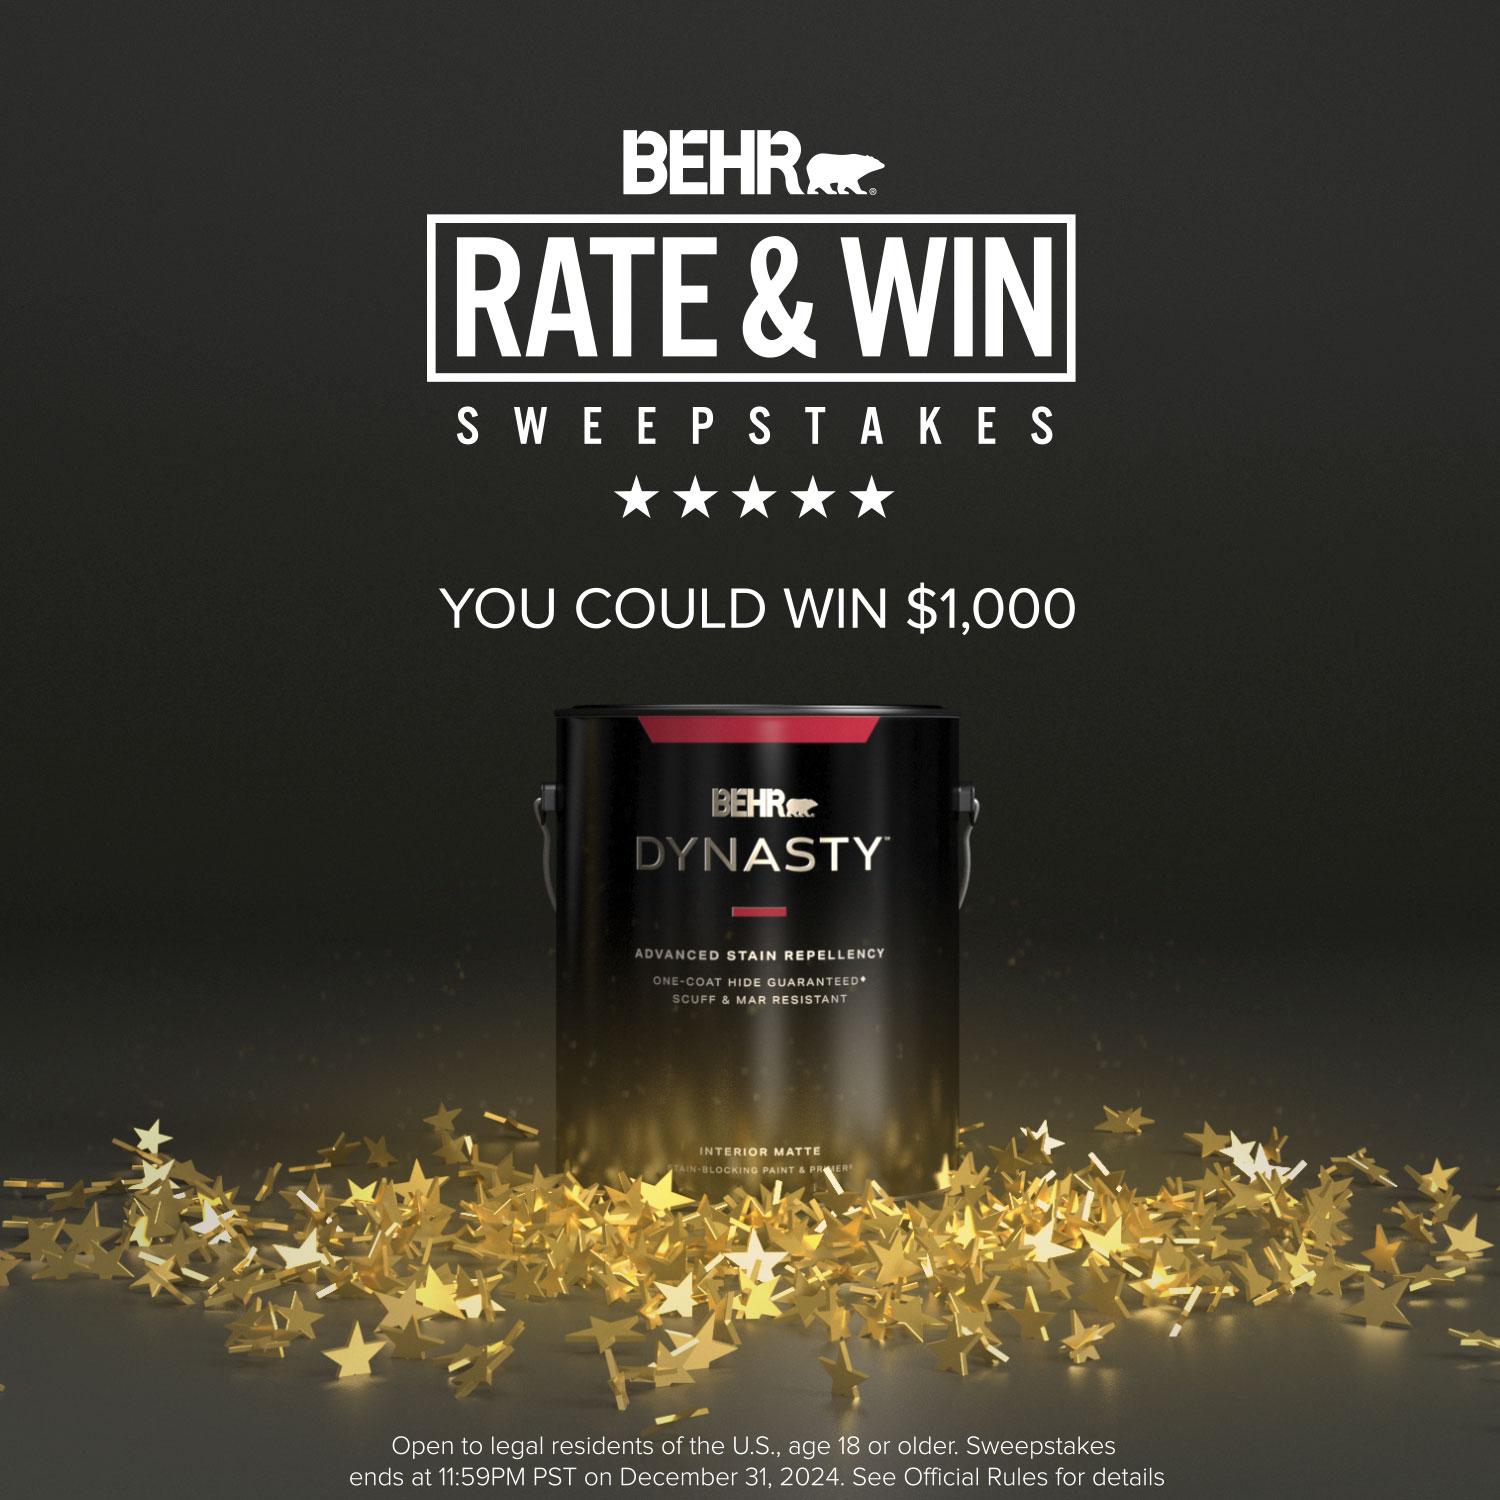 Rate & Win Sweepstakes 2024 with Behr Dynasty interior paint and stars in the foreground.